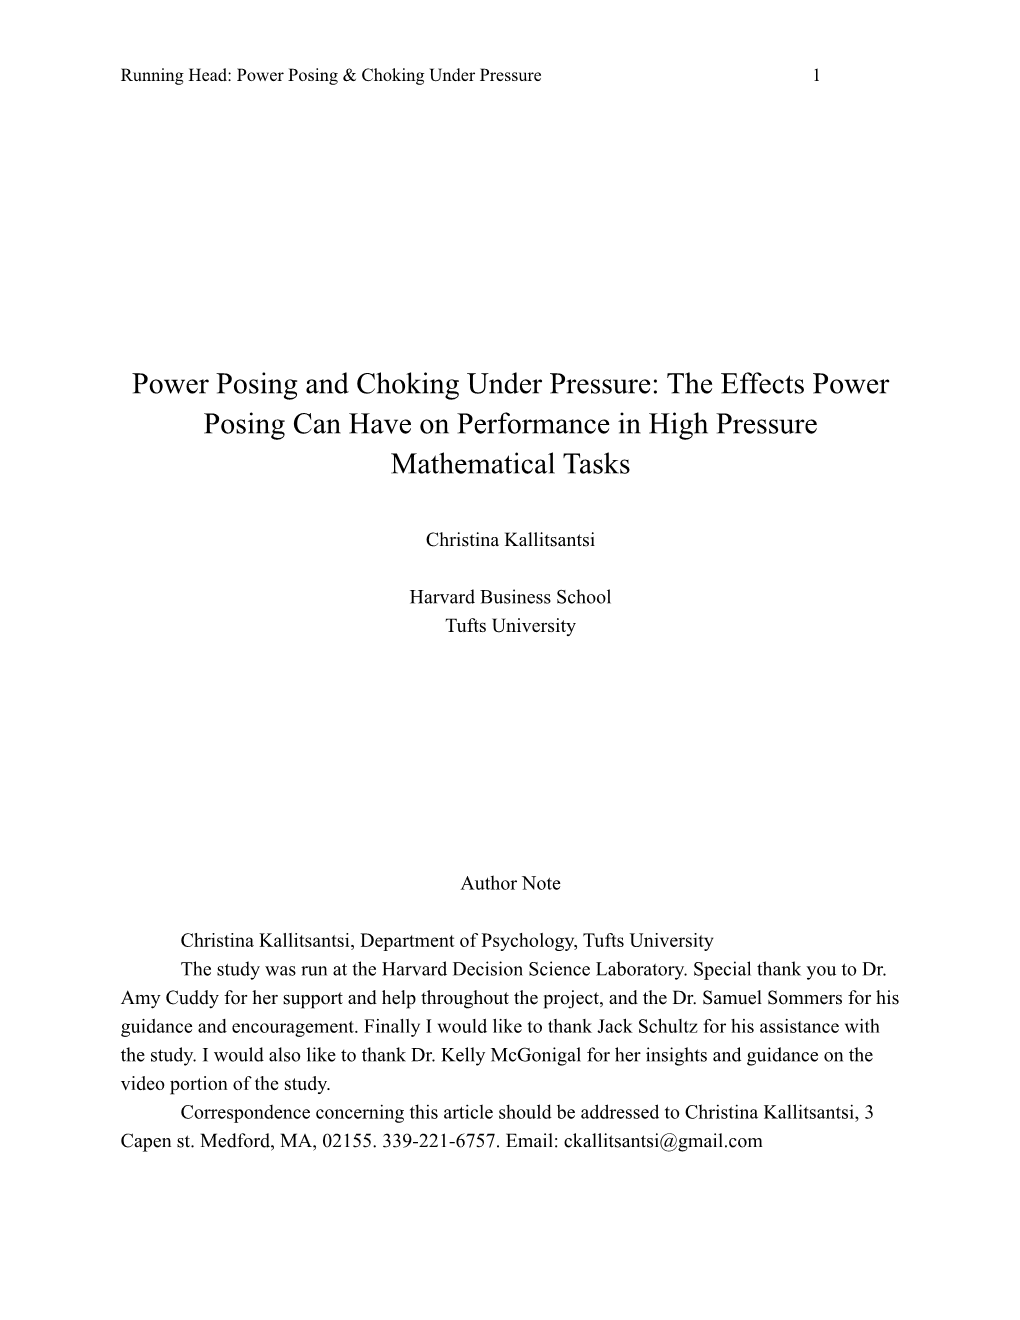 Thesis Final Paper- Revised